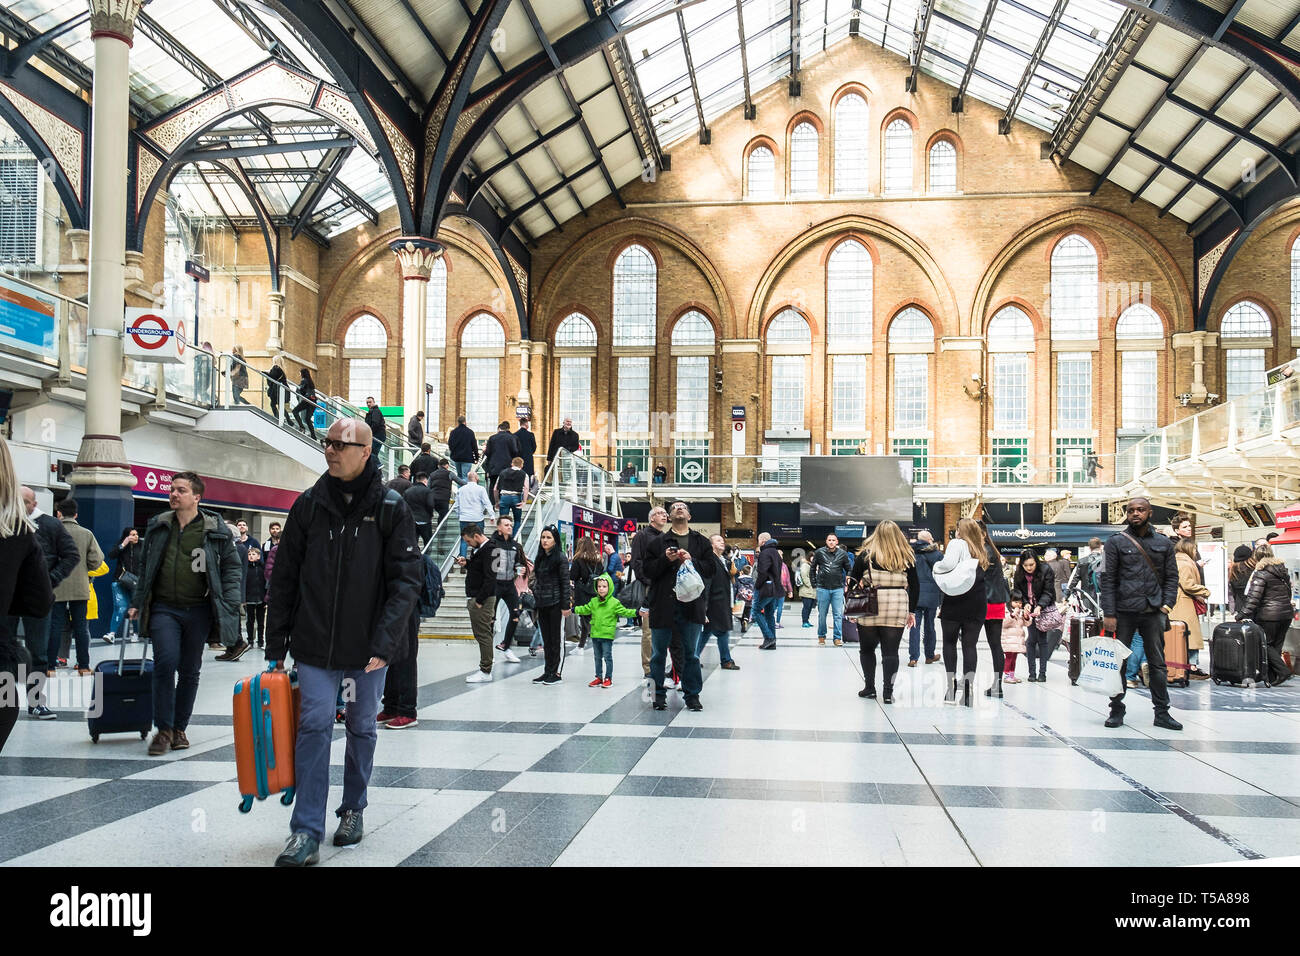 The busy concourse in Liverpool Street Station in London. Stock Photo